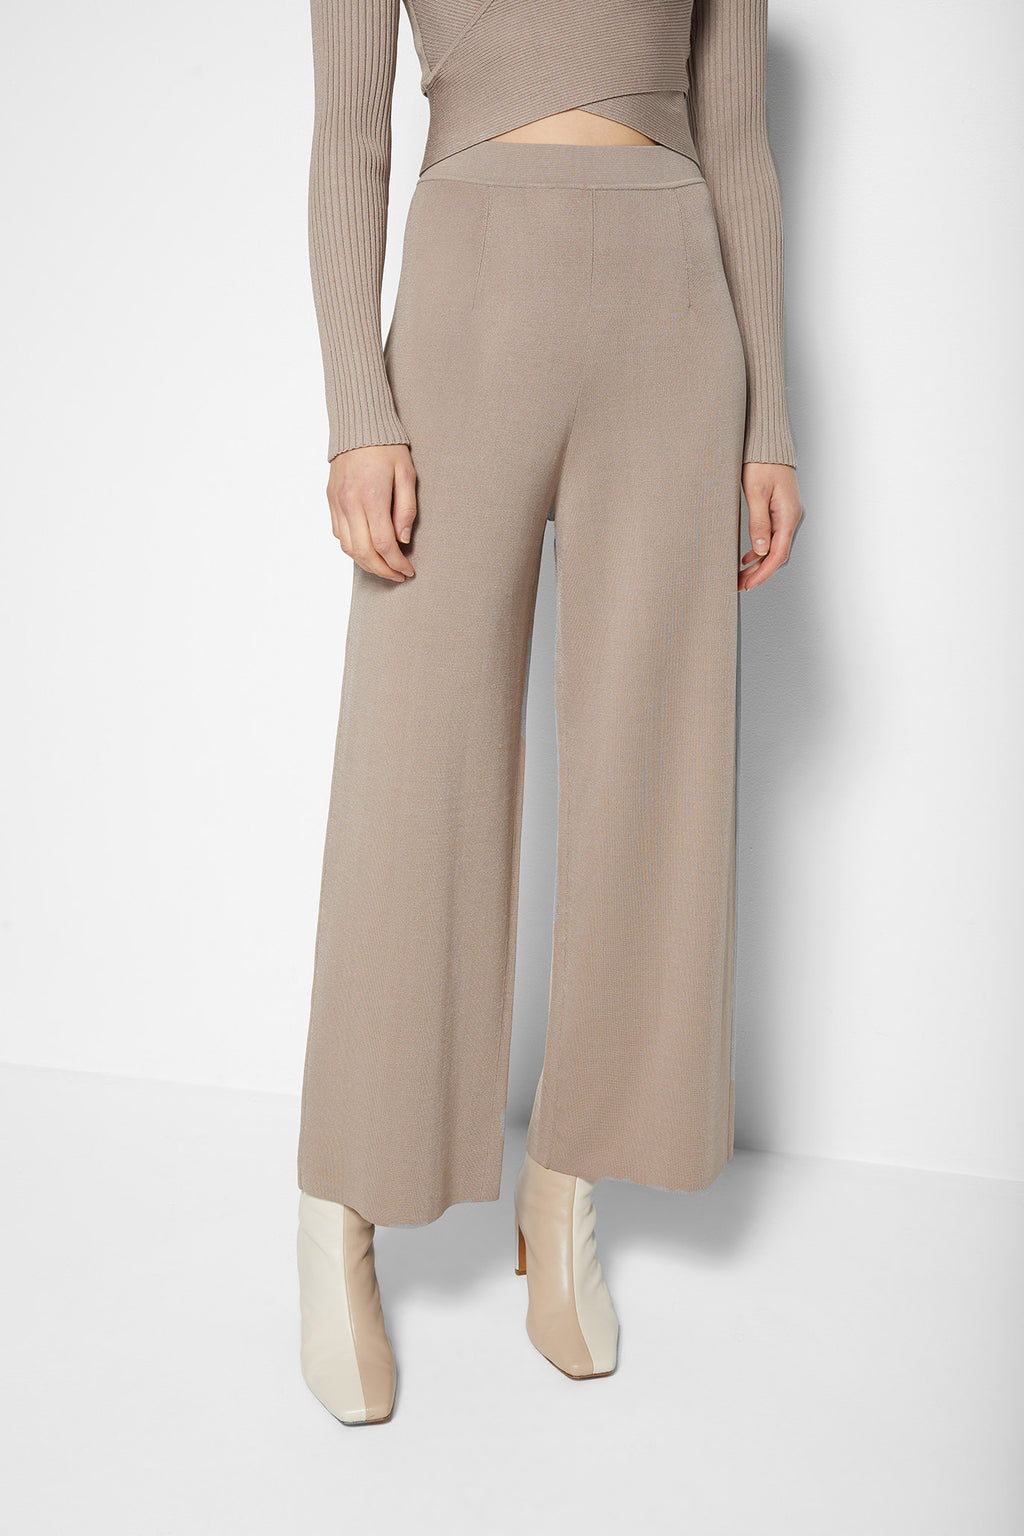 Lily Cropped Pant